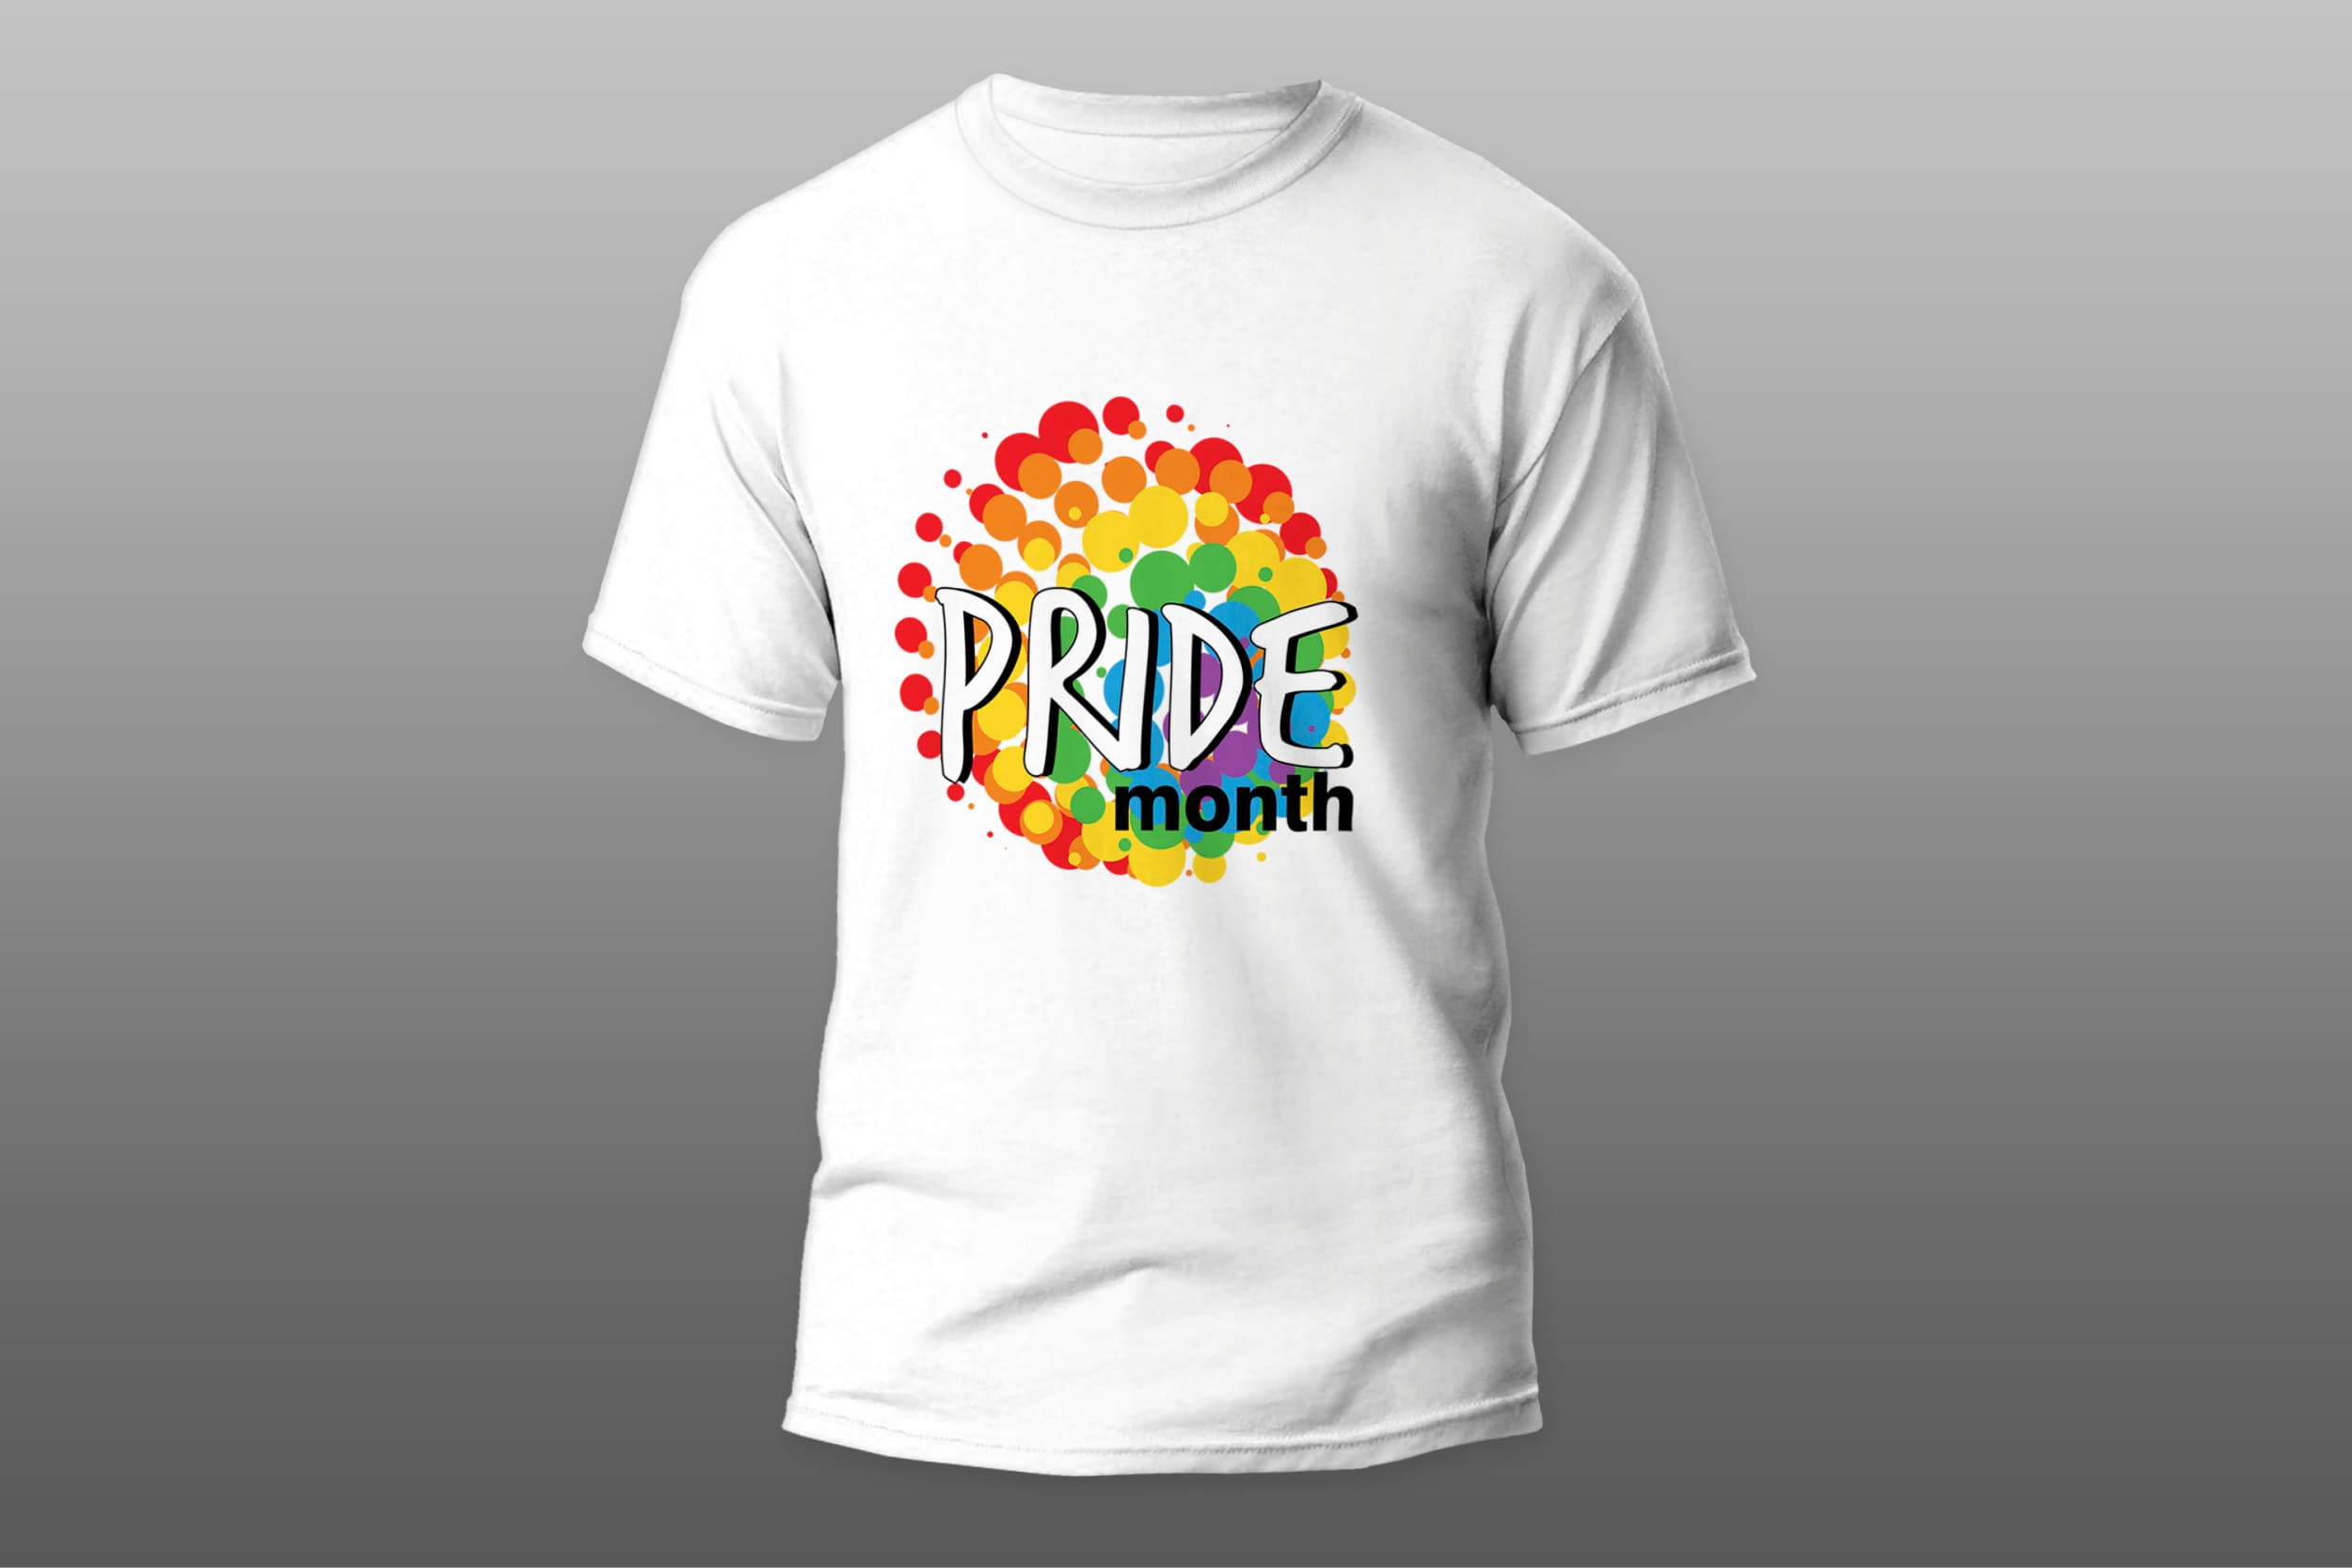 White t-shirt with white and black "Pride Month" lettering against the background of the LGBT flag on a gray background.